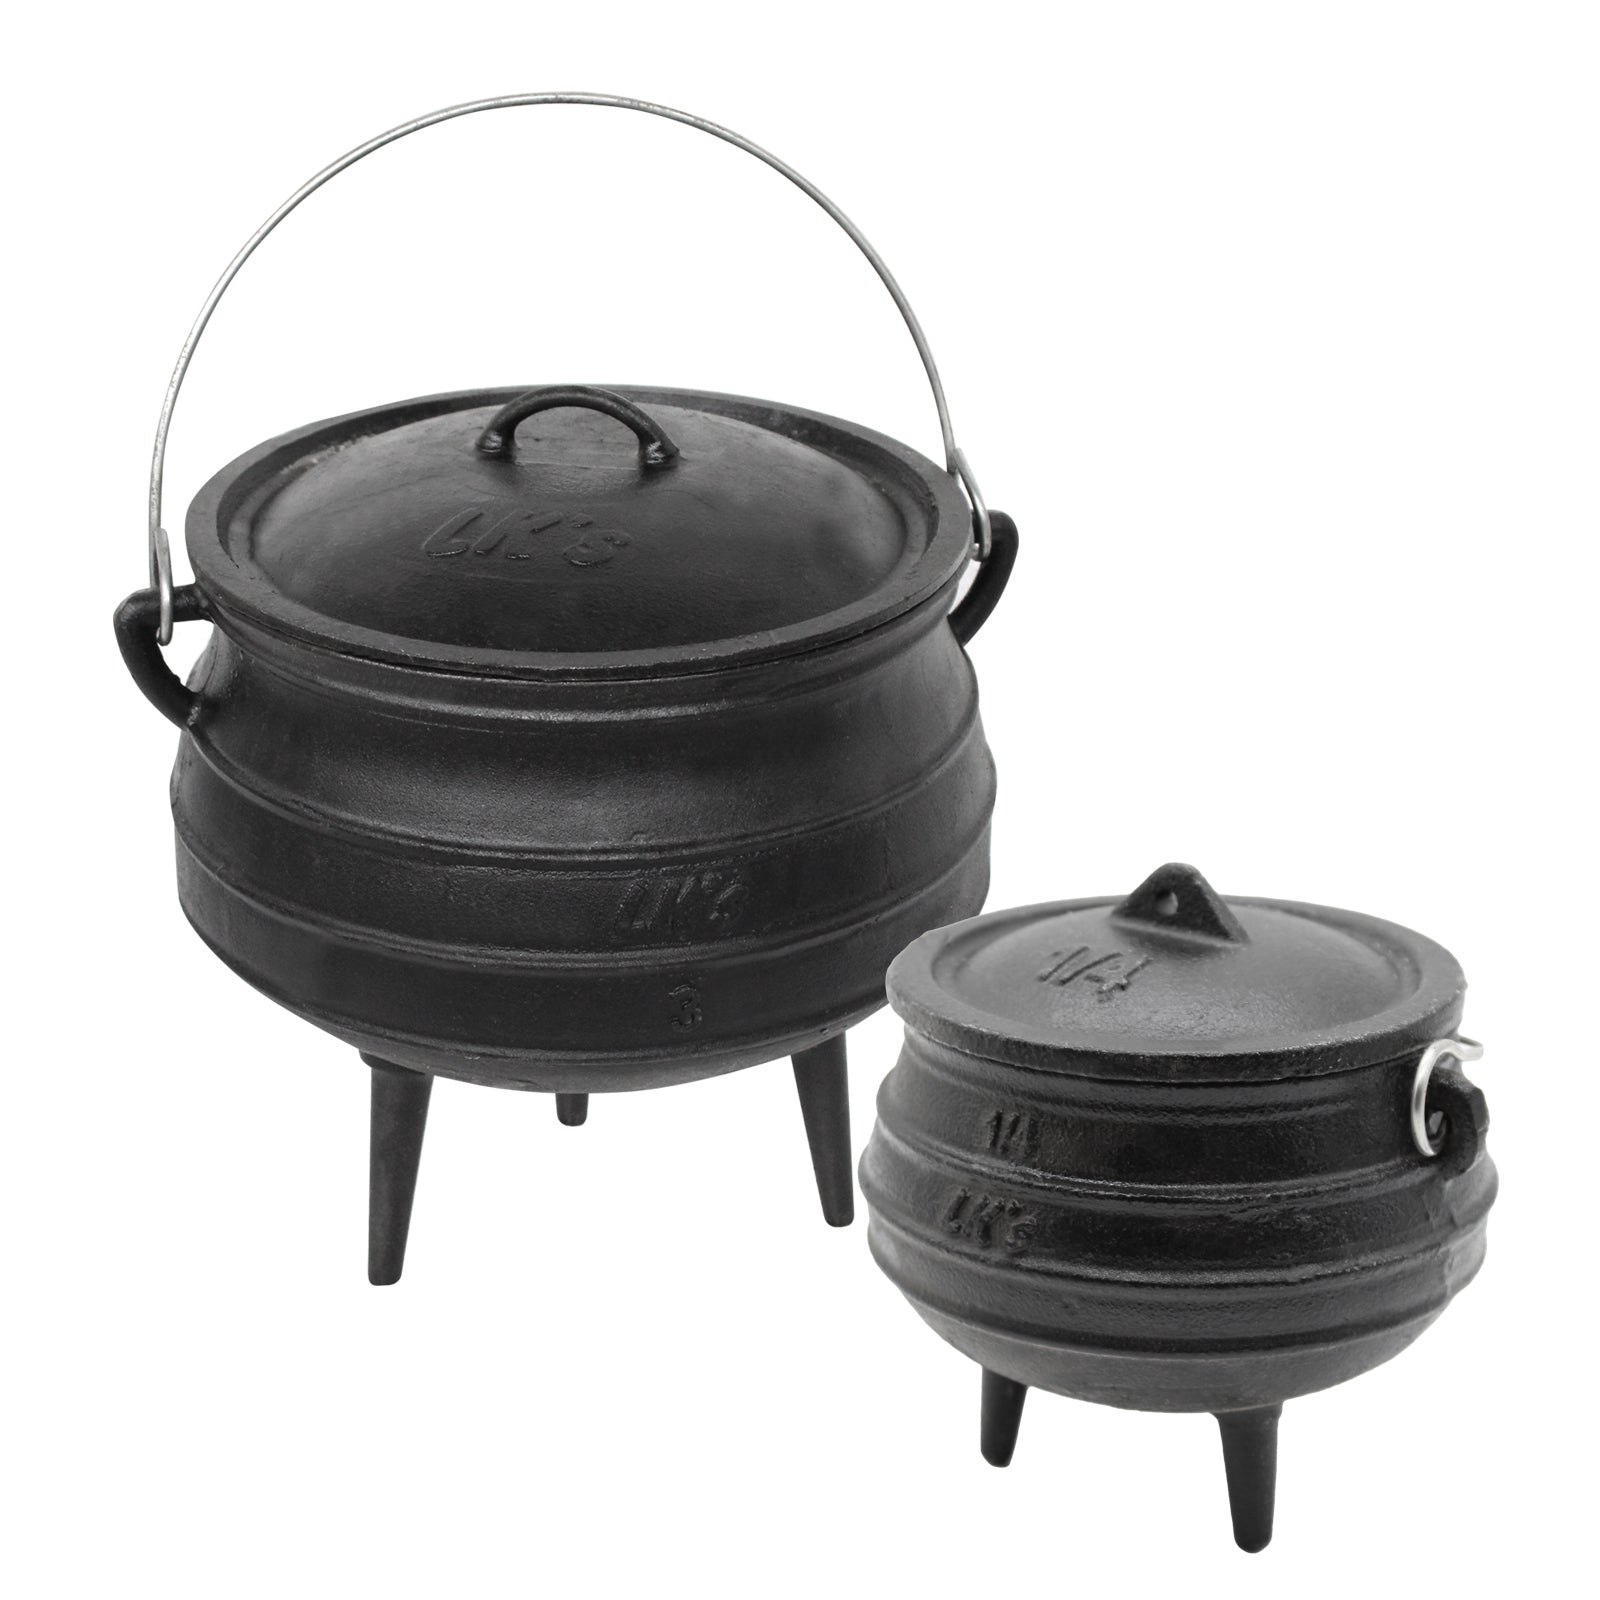 Potjie Pots Size 3 and 1/4